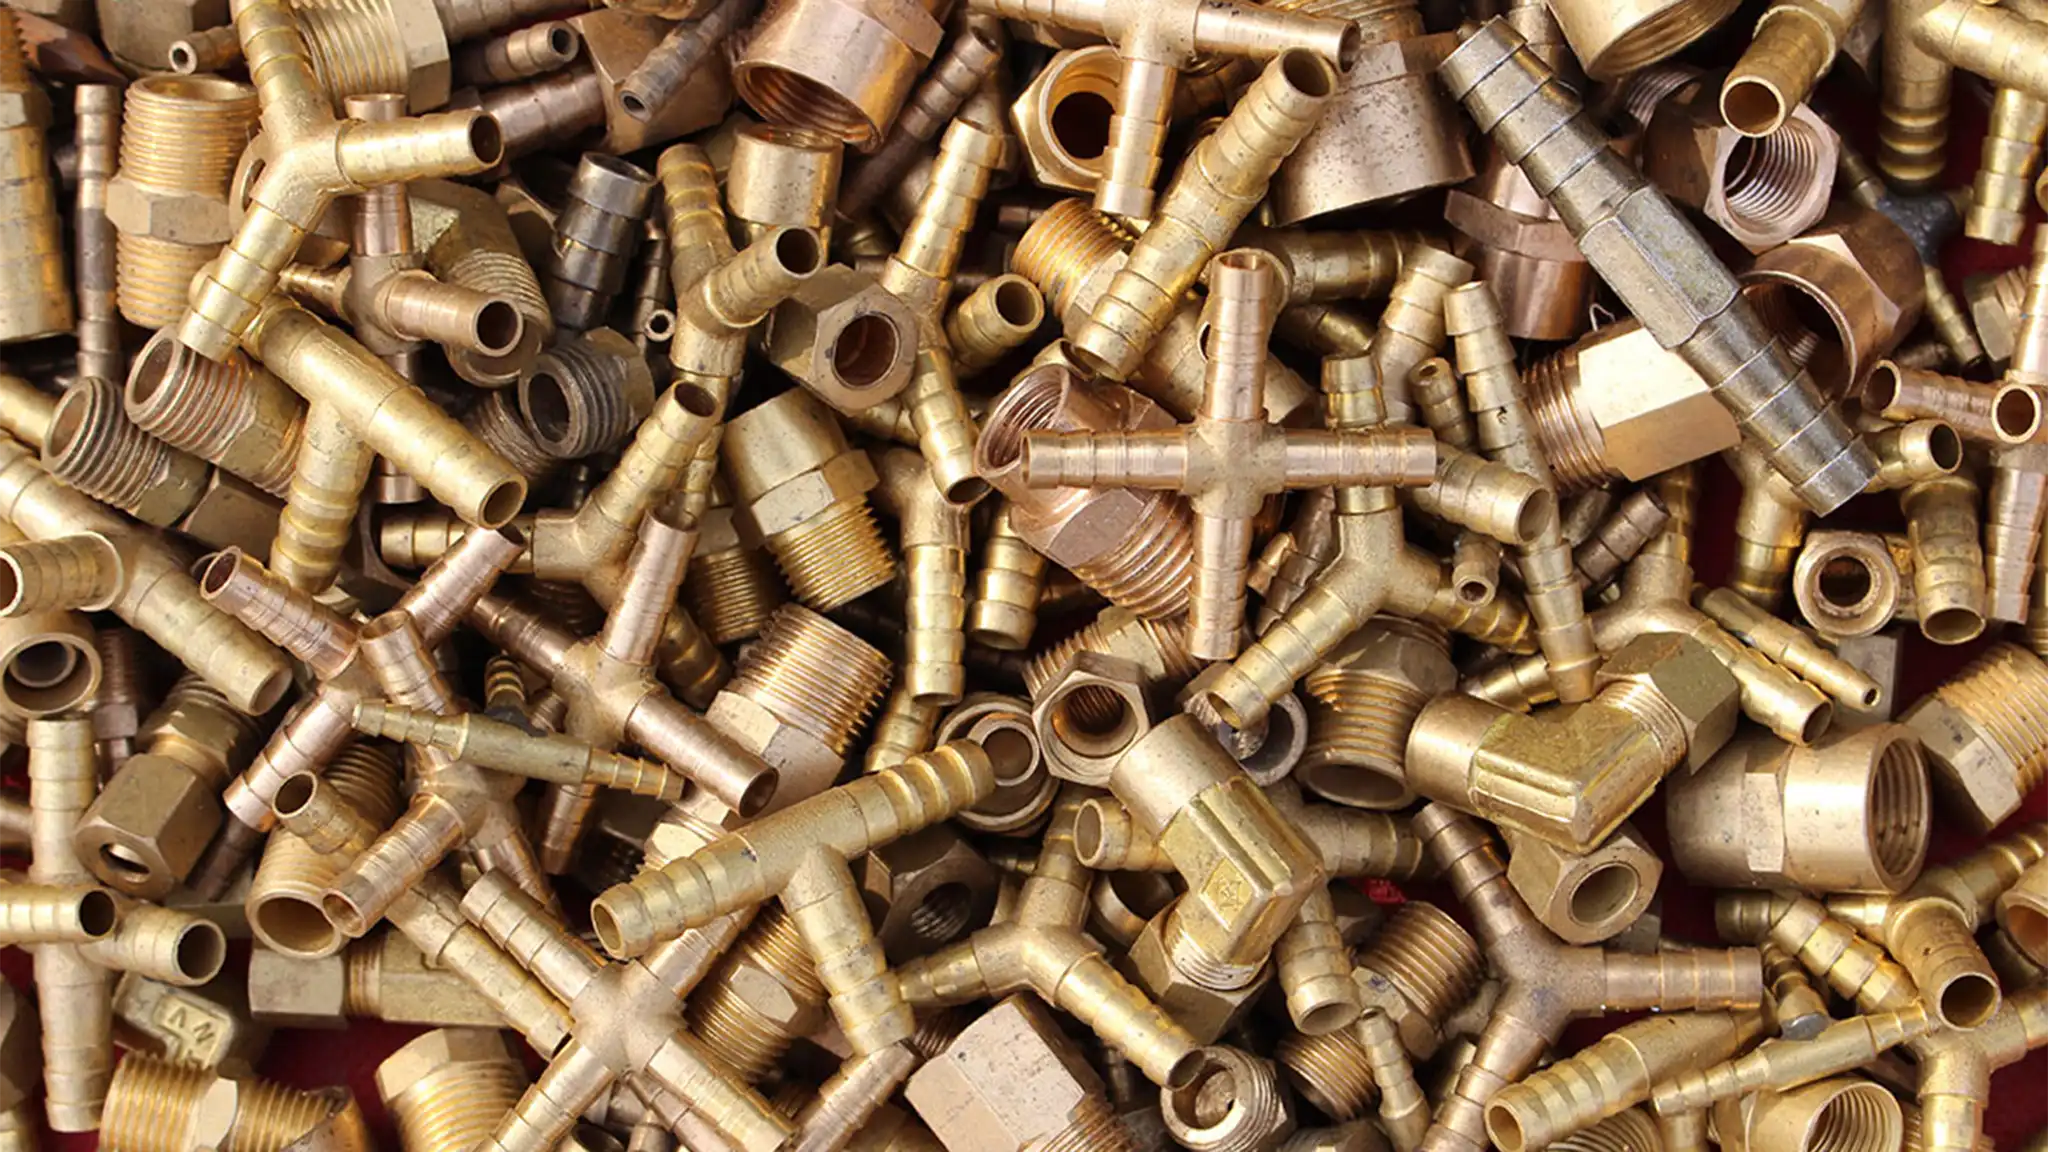 NST Hitech Recycling - Red Brass Scrap Services, Red Brass Scrap Services  in Chennai, Red Brass Scrap Services in India, Red Brass Scrap Services  Near Me, For Red Brass Scrap Services Call: (+